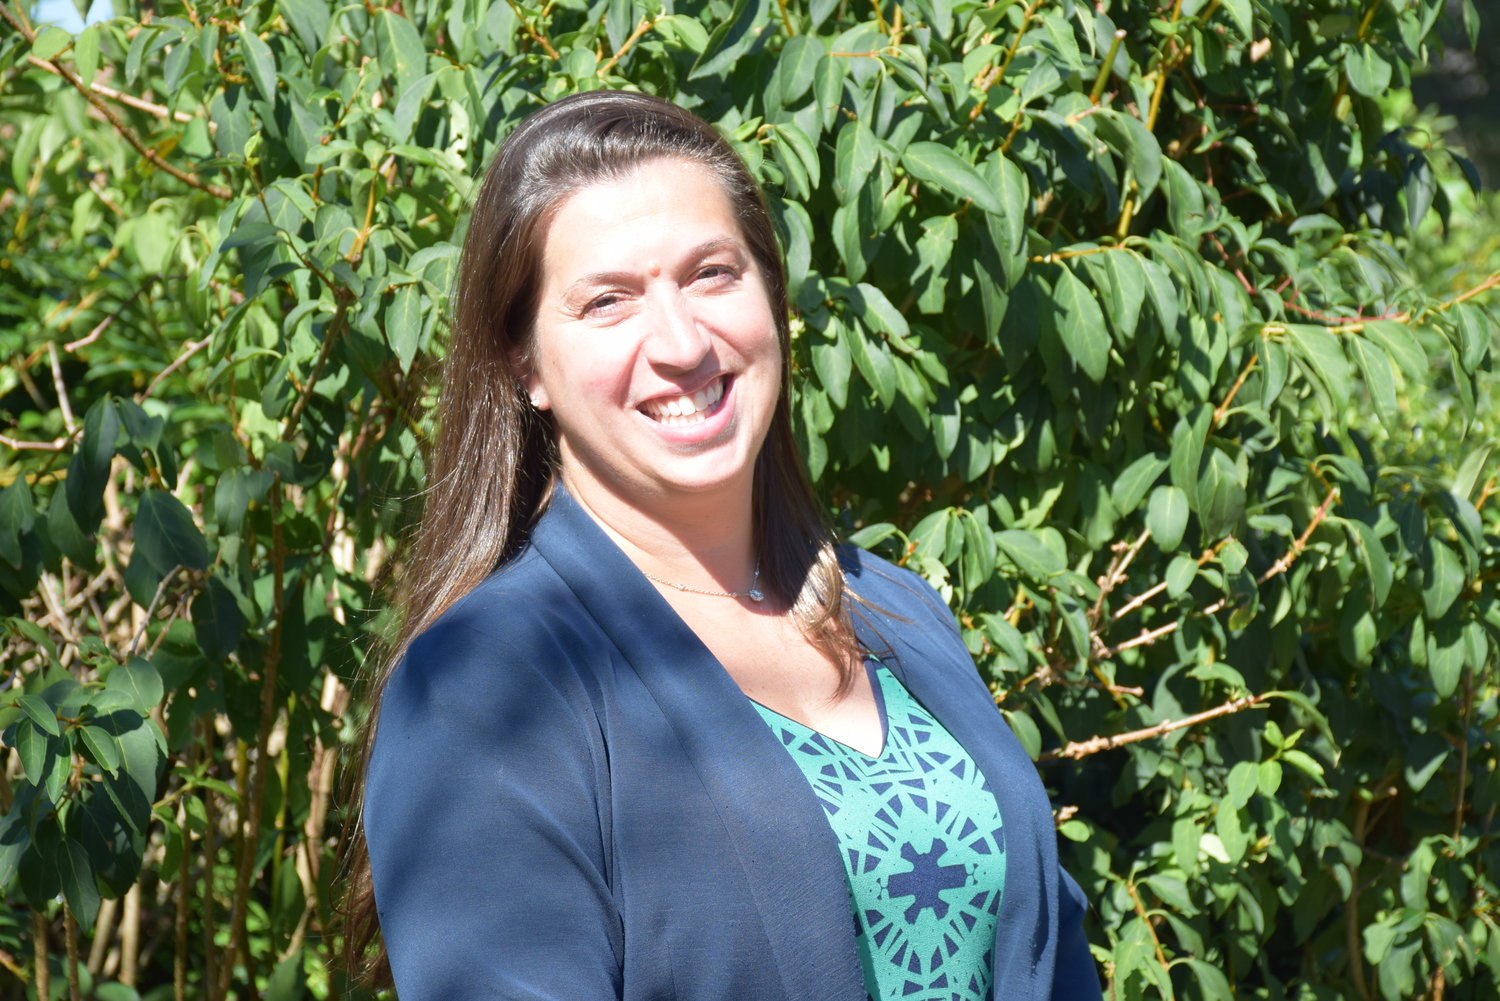 Danielle Black, who has amassed significant hands-on experience with and attained multiple degrees about the education of special needs students, has been appointed as assistant principal of Oakdale-Bohemia Middle School.